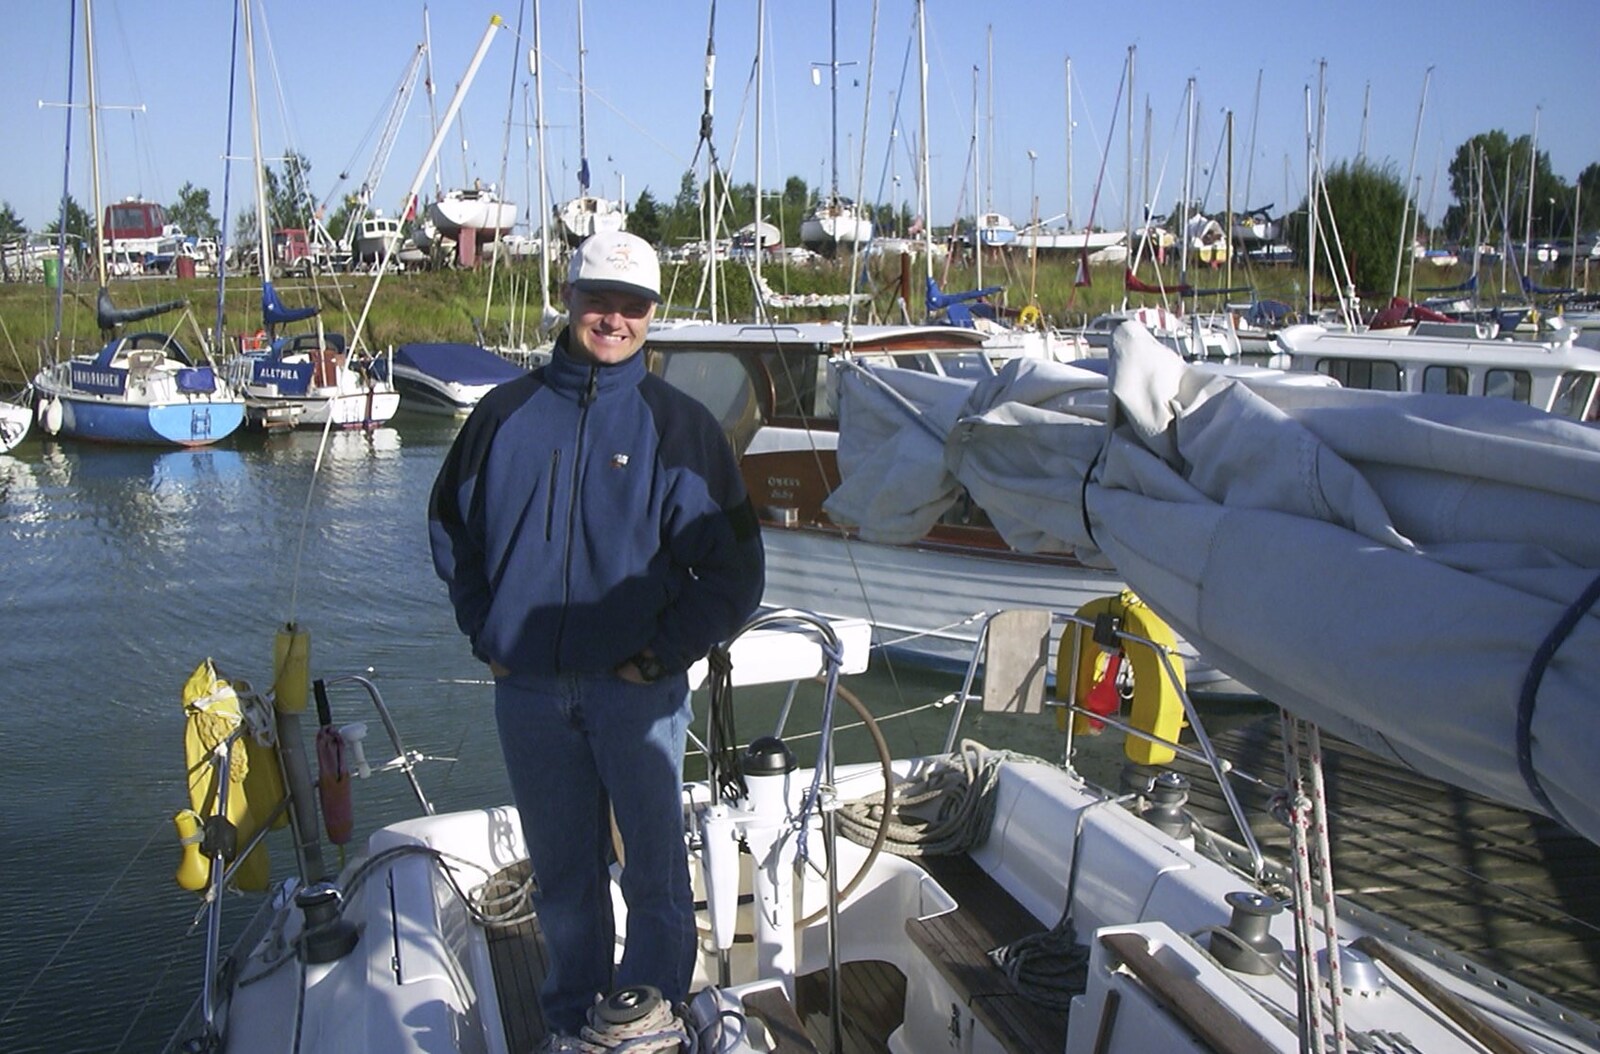 Nick stands astern from A 3G Lab Sailing Trip, Shotley, Suffolk - 6th September 2001